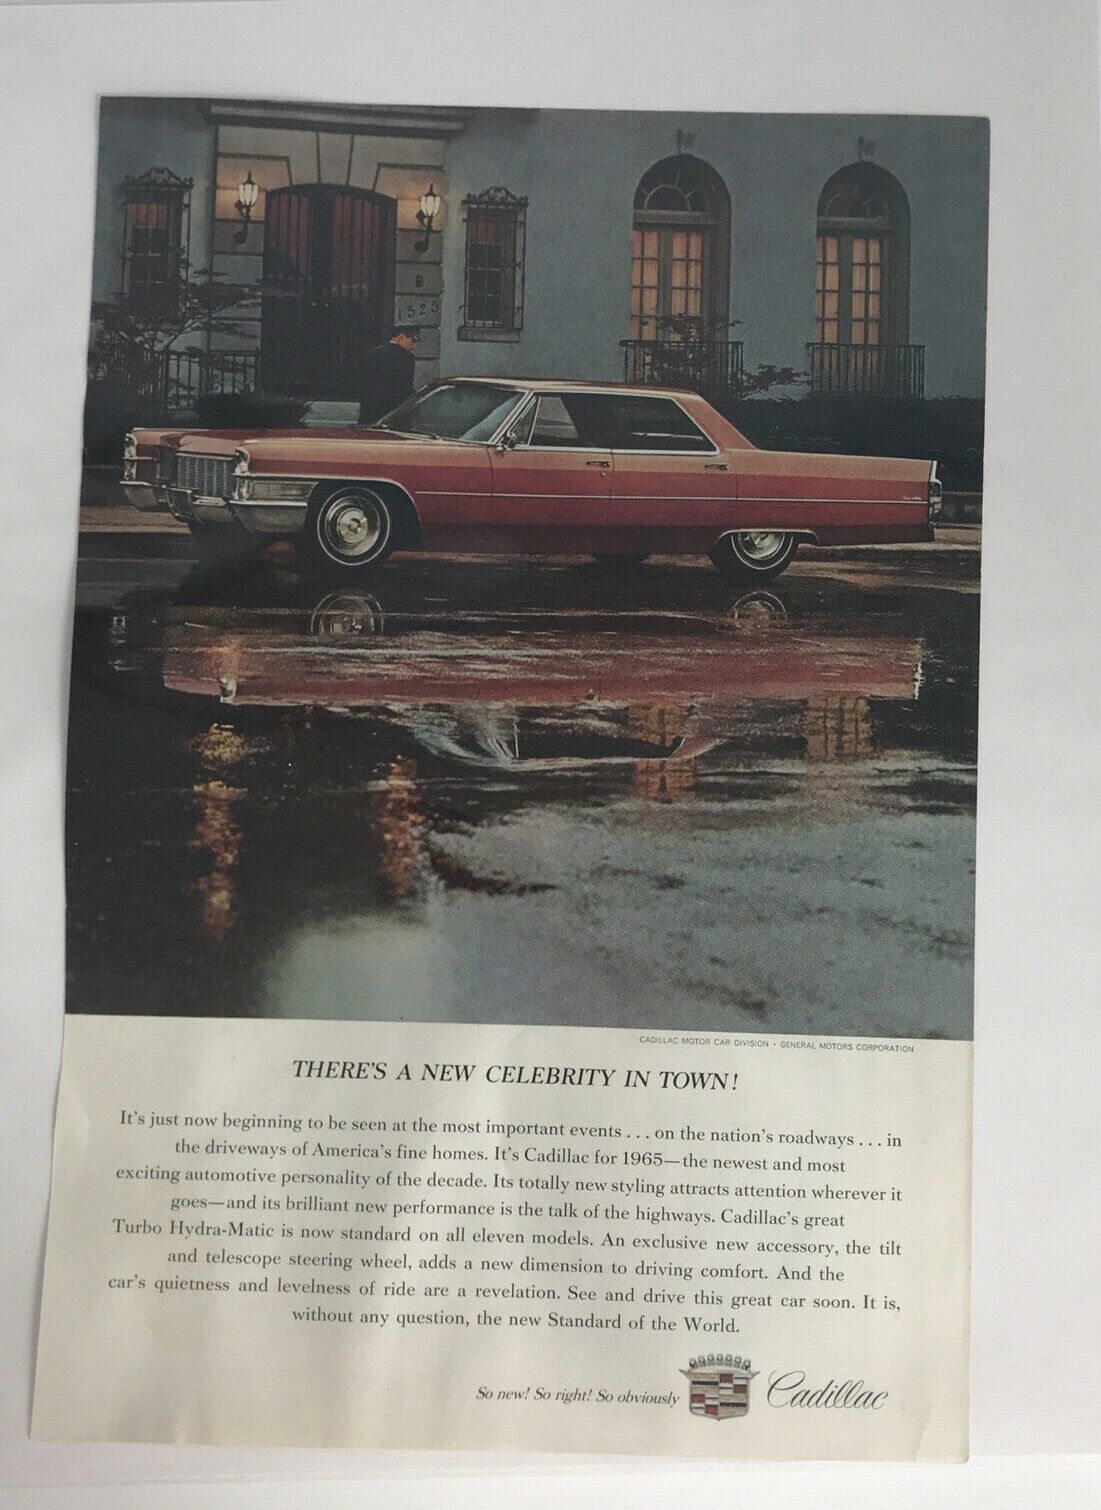 Primary image for There’s A New Celebrity In Town Cadillac Turbo Hydra Matic Print Ad 1965